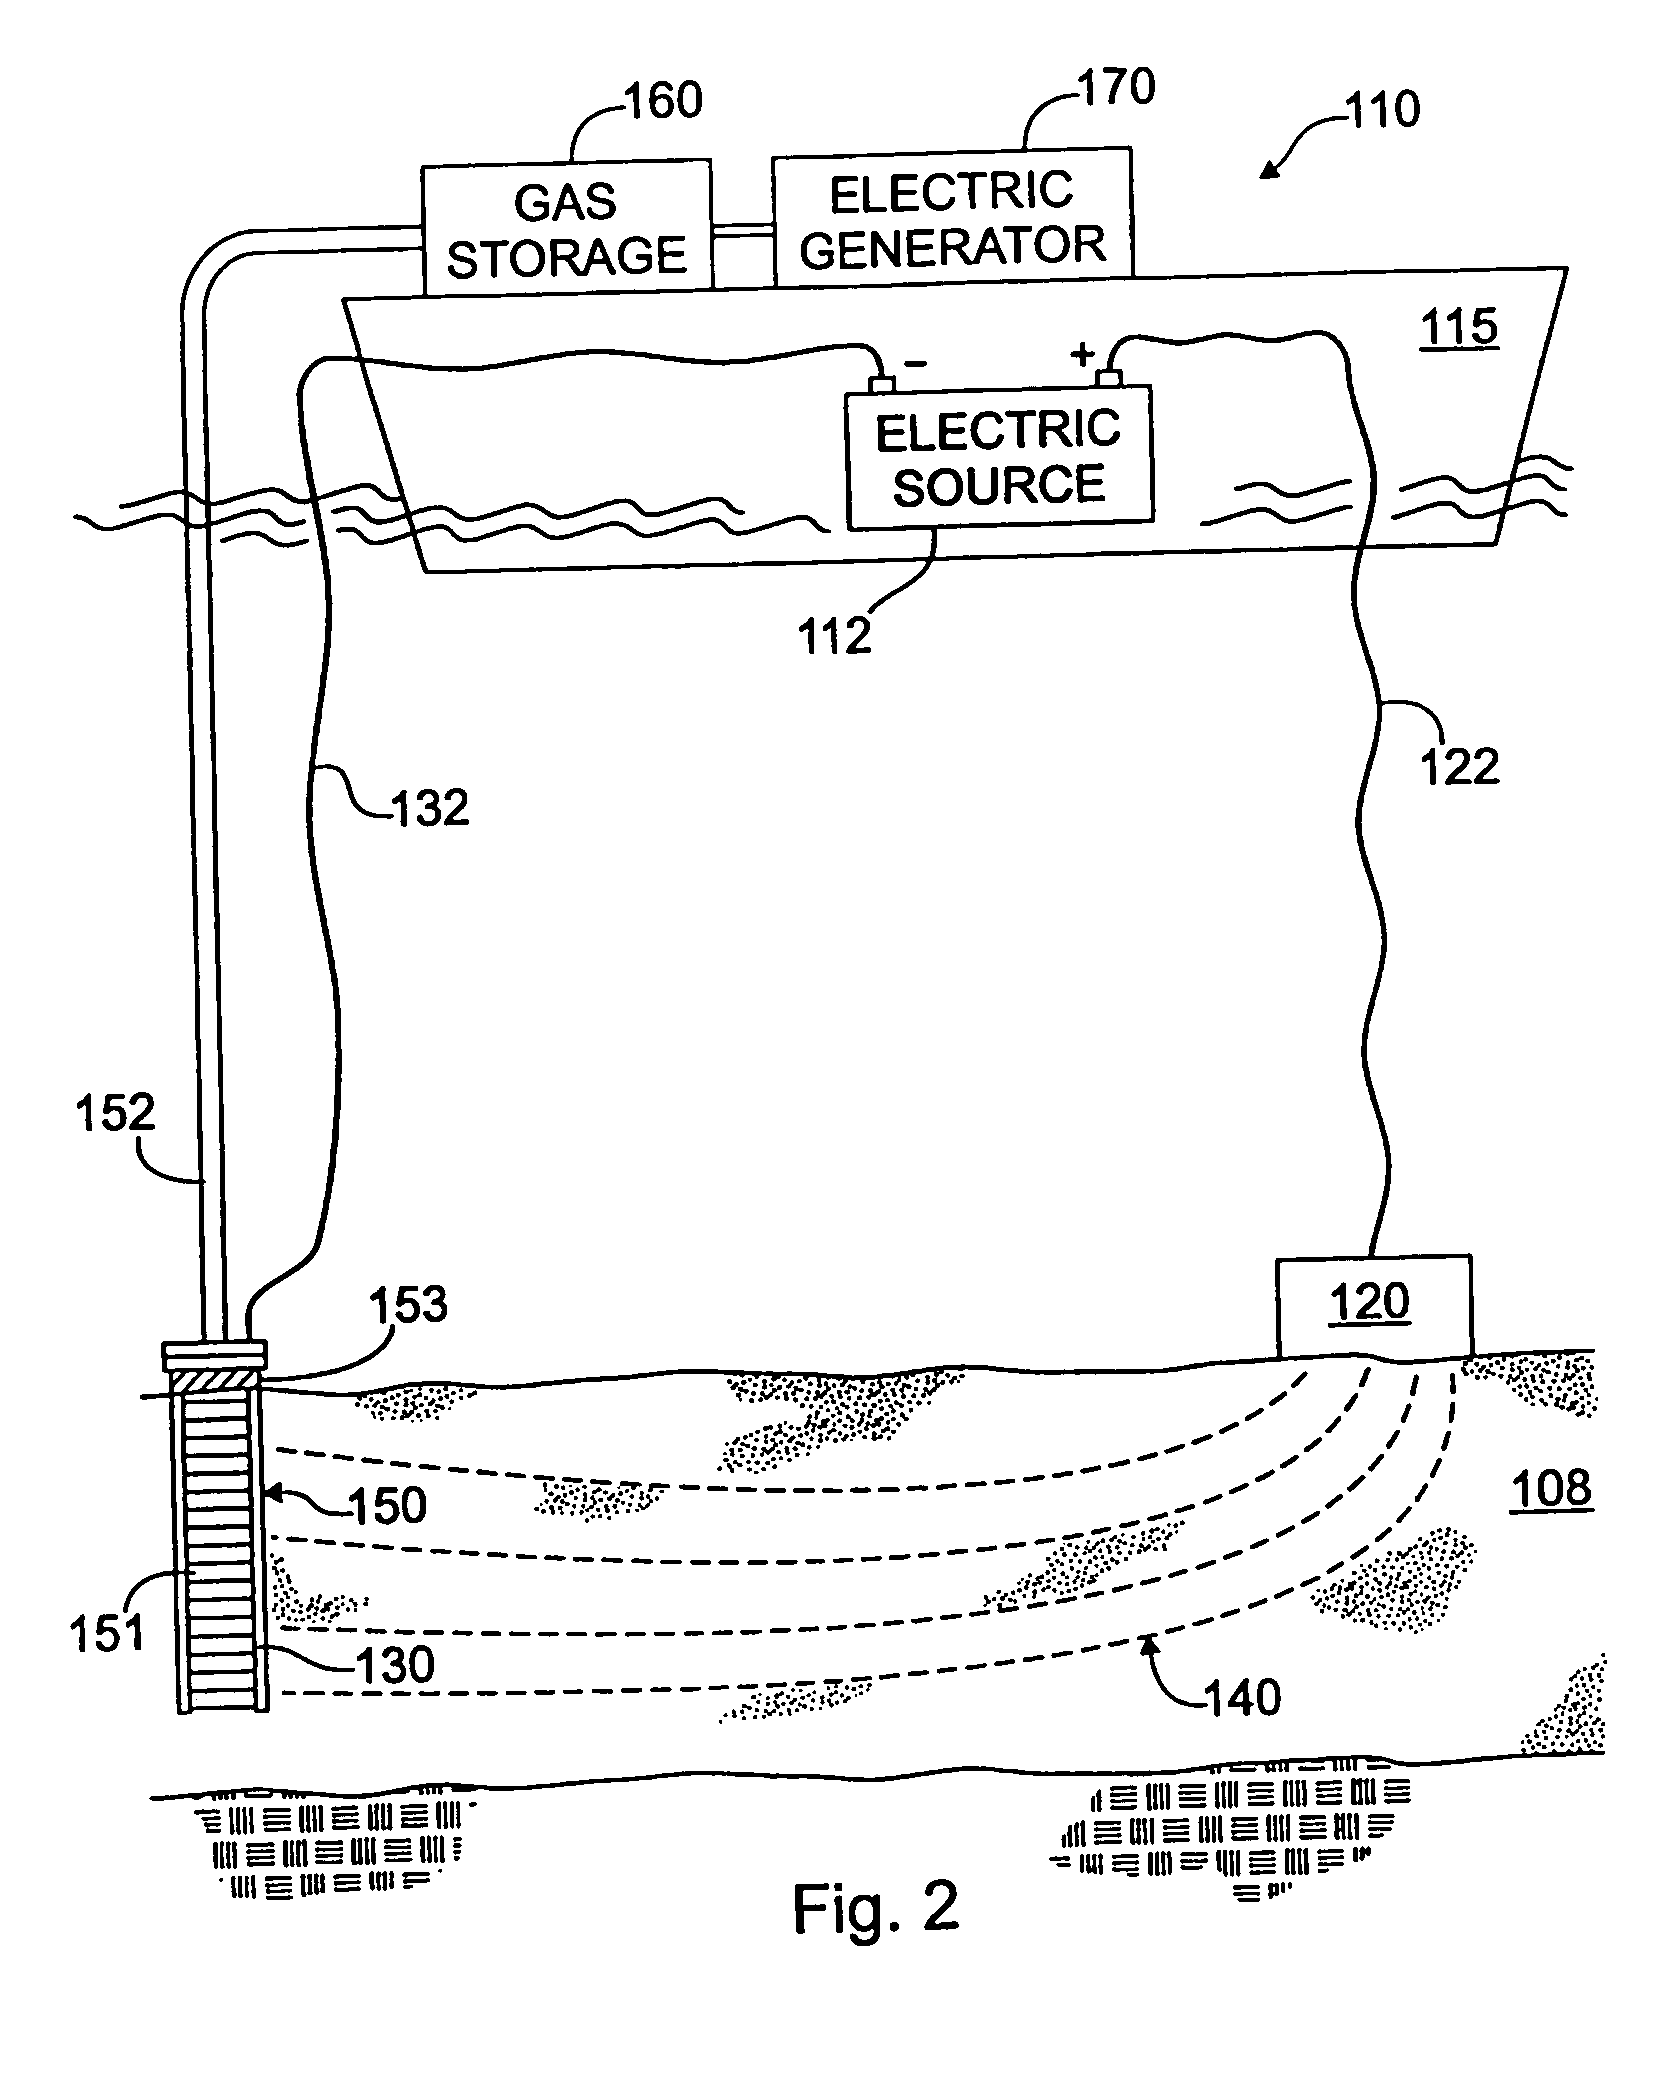 Method and system for producing methane gas from methane hydrate formations